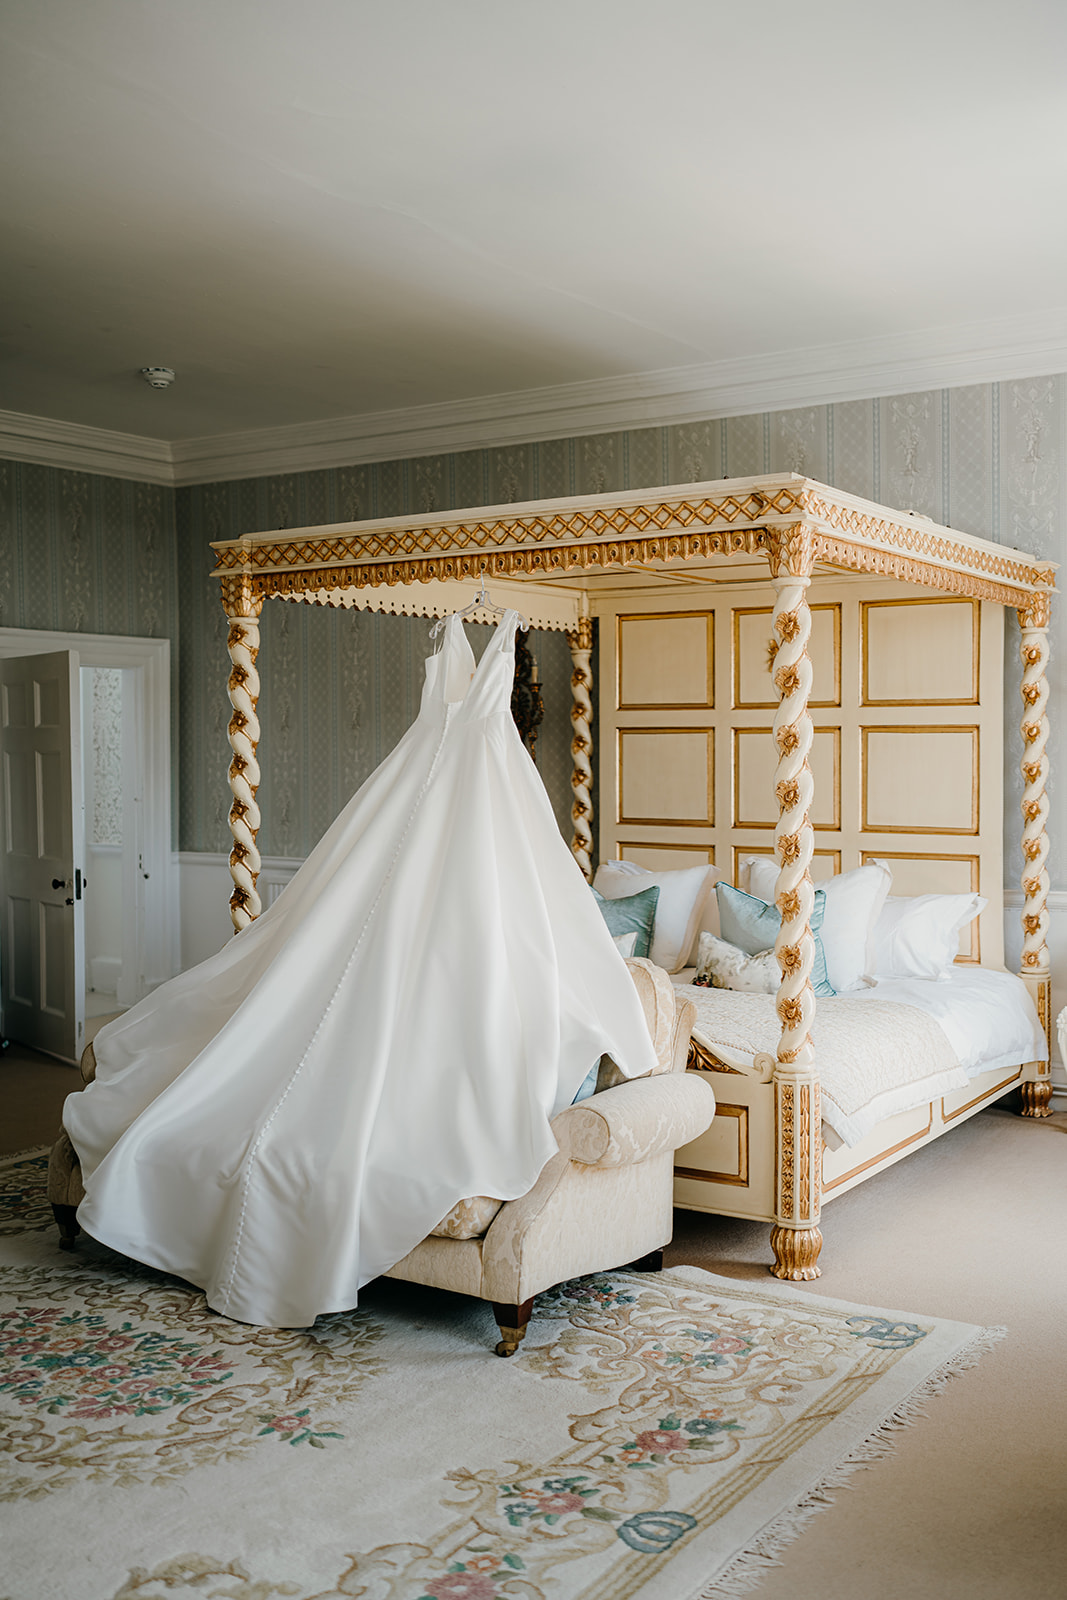 Bridal dress hanging on the stunning four poster bed in Norwood Park's bridal suite